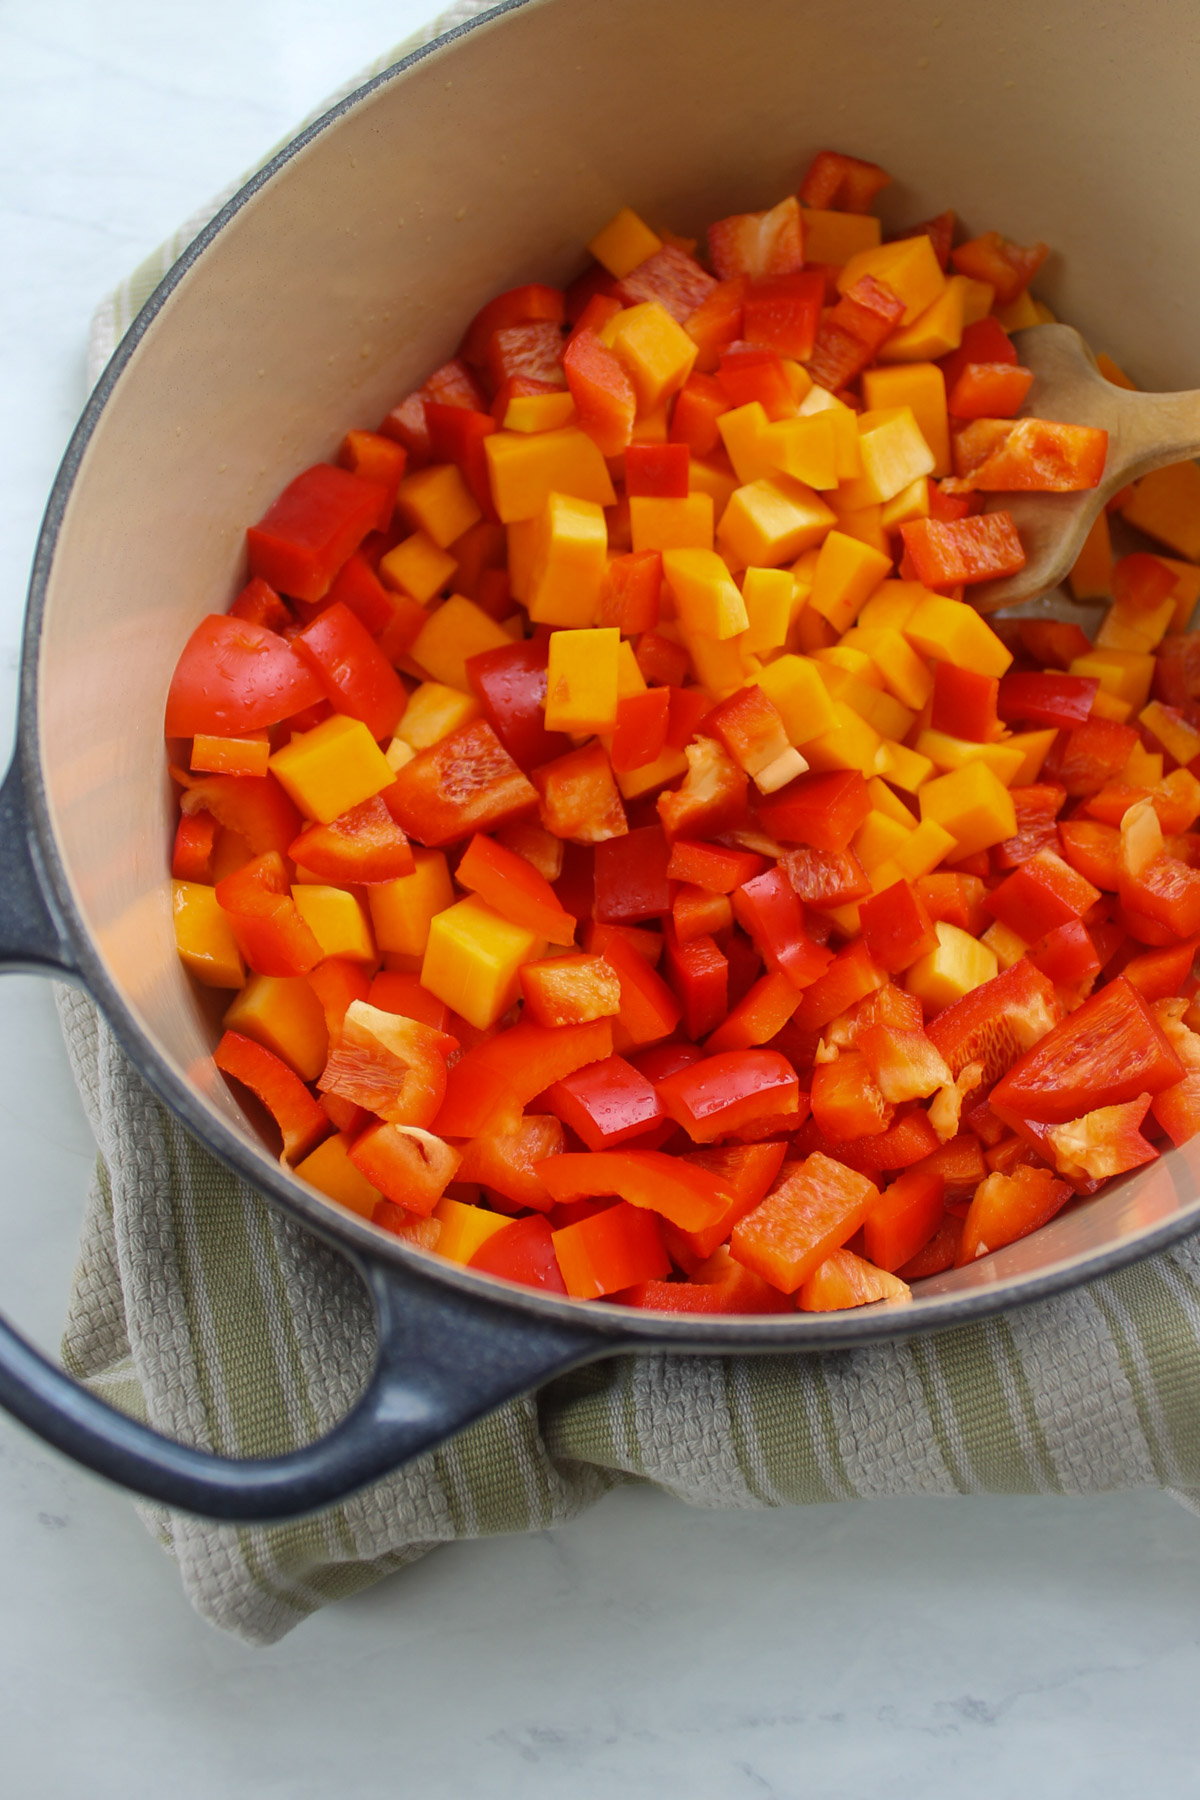 A soup pot full of chopped butternut squash and red bell peppers.